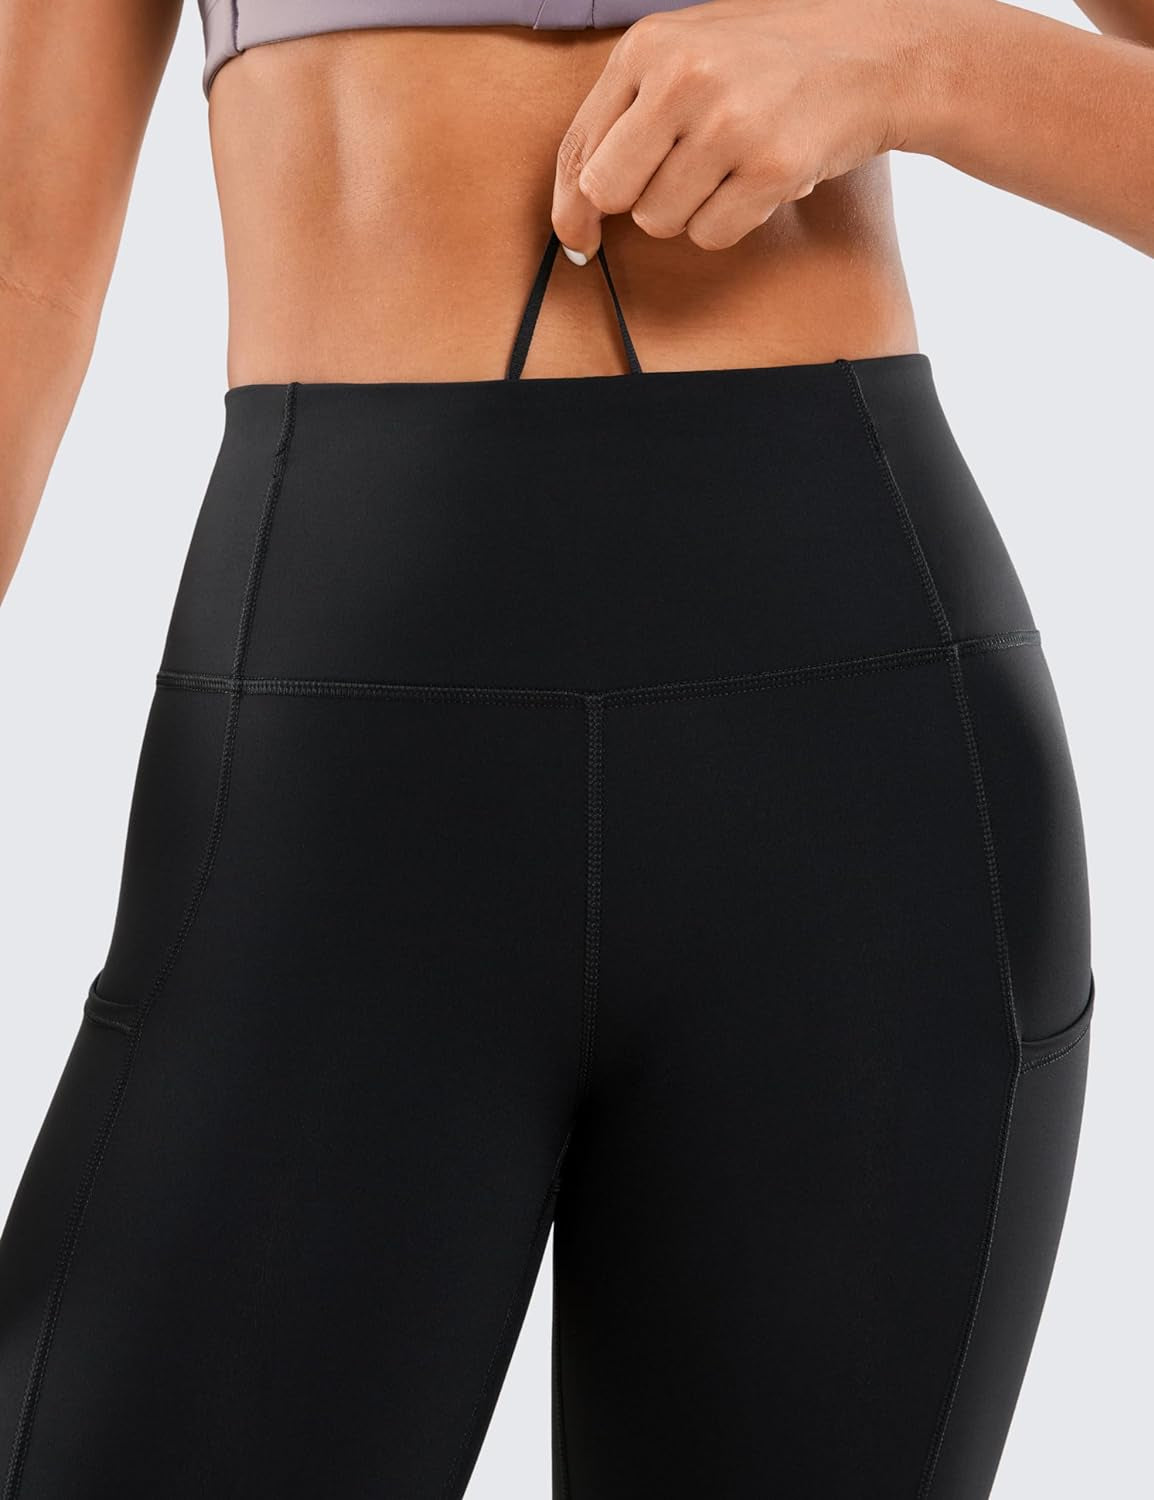 "Ultimate Performance Yoga Leggings: Women'S High-Waisted Workout Pants with Side Pockets - Experience Supreme Comfort and Support!"